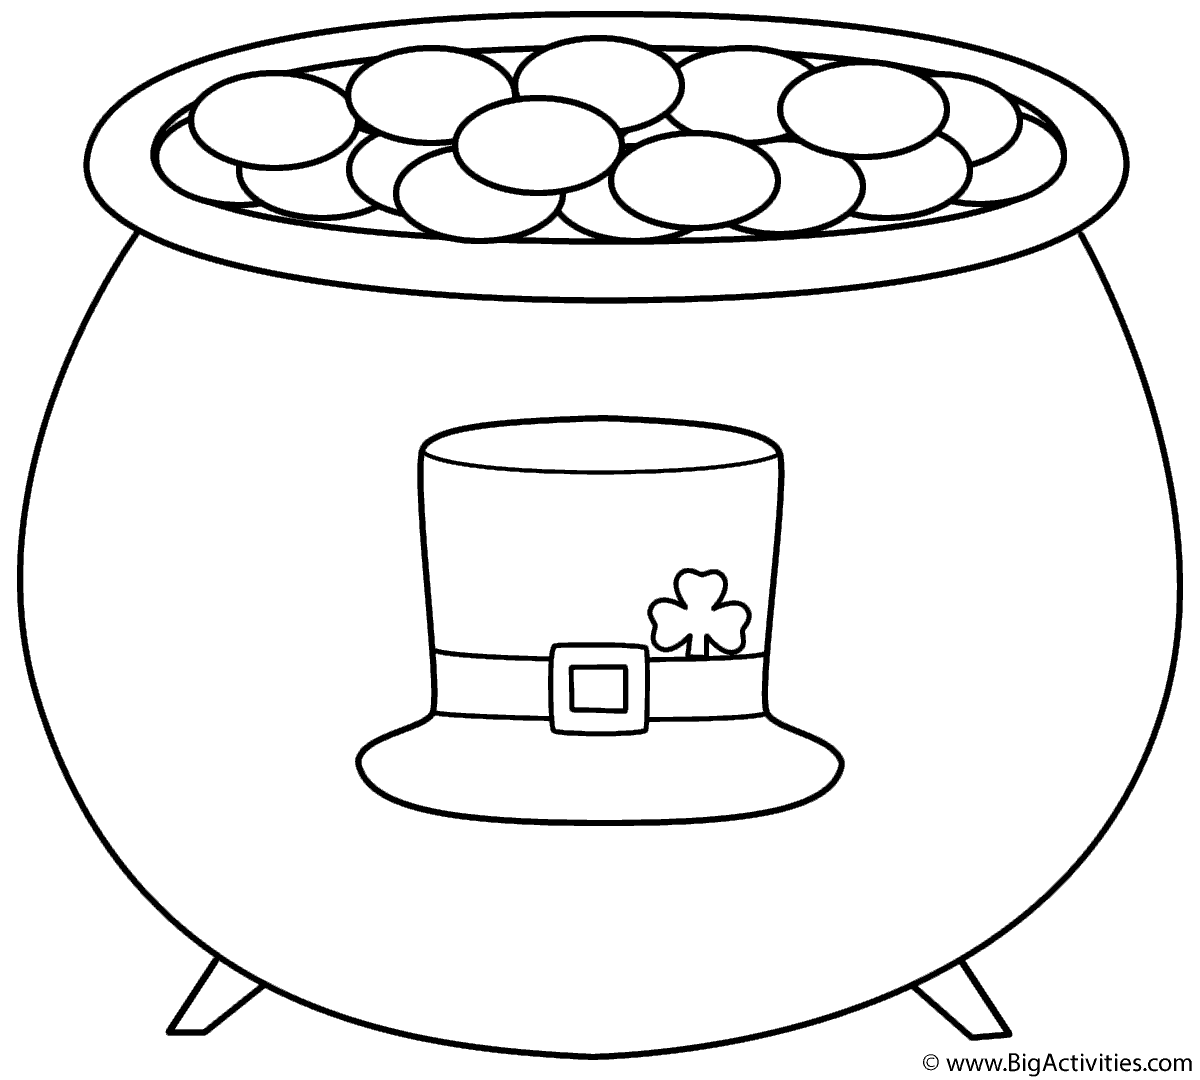 Download Pot of Gold with Leprechaun Hat - Coloring Page (St. Patrick's Day)